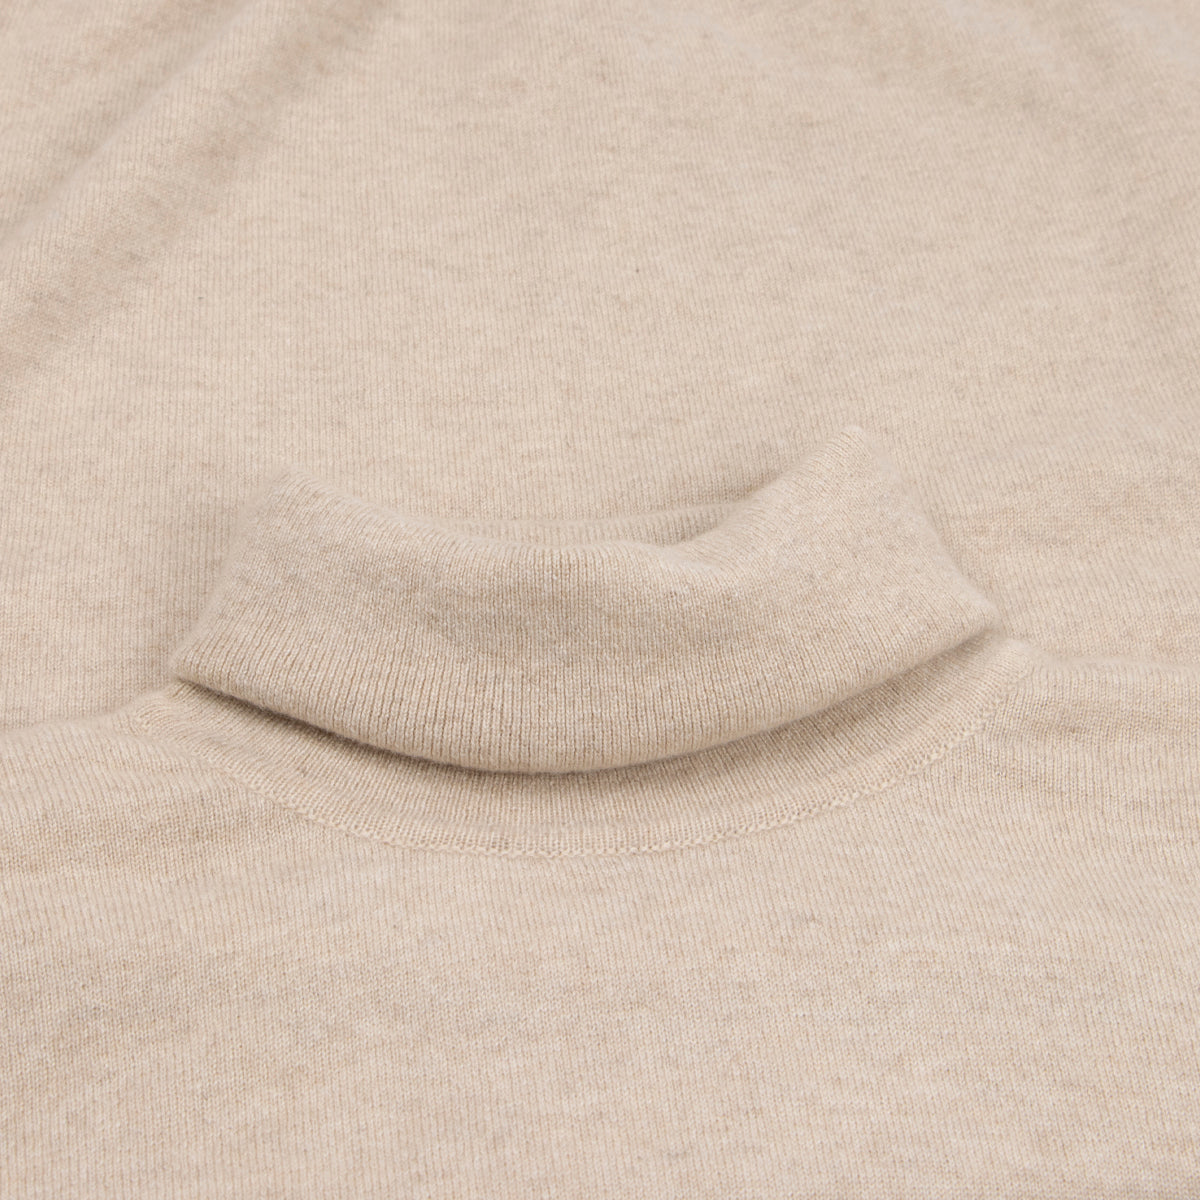 Linen Elgin 2ply Roll Neck Cashmere Sweater  Robert Old   